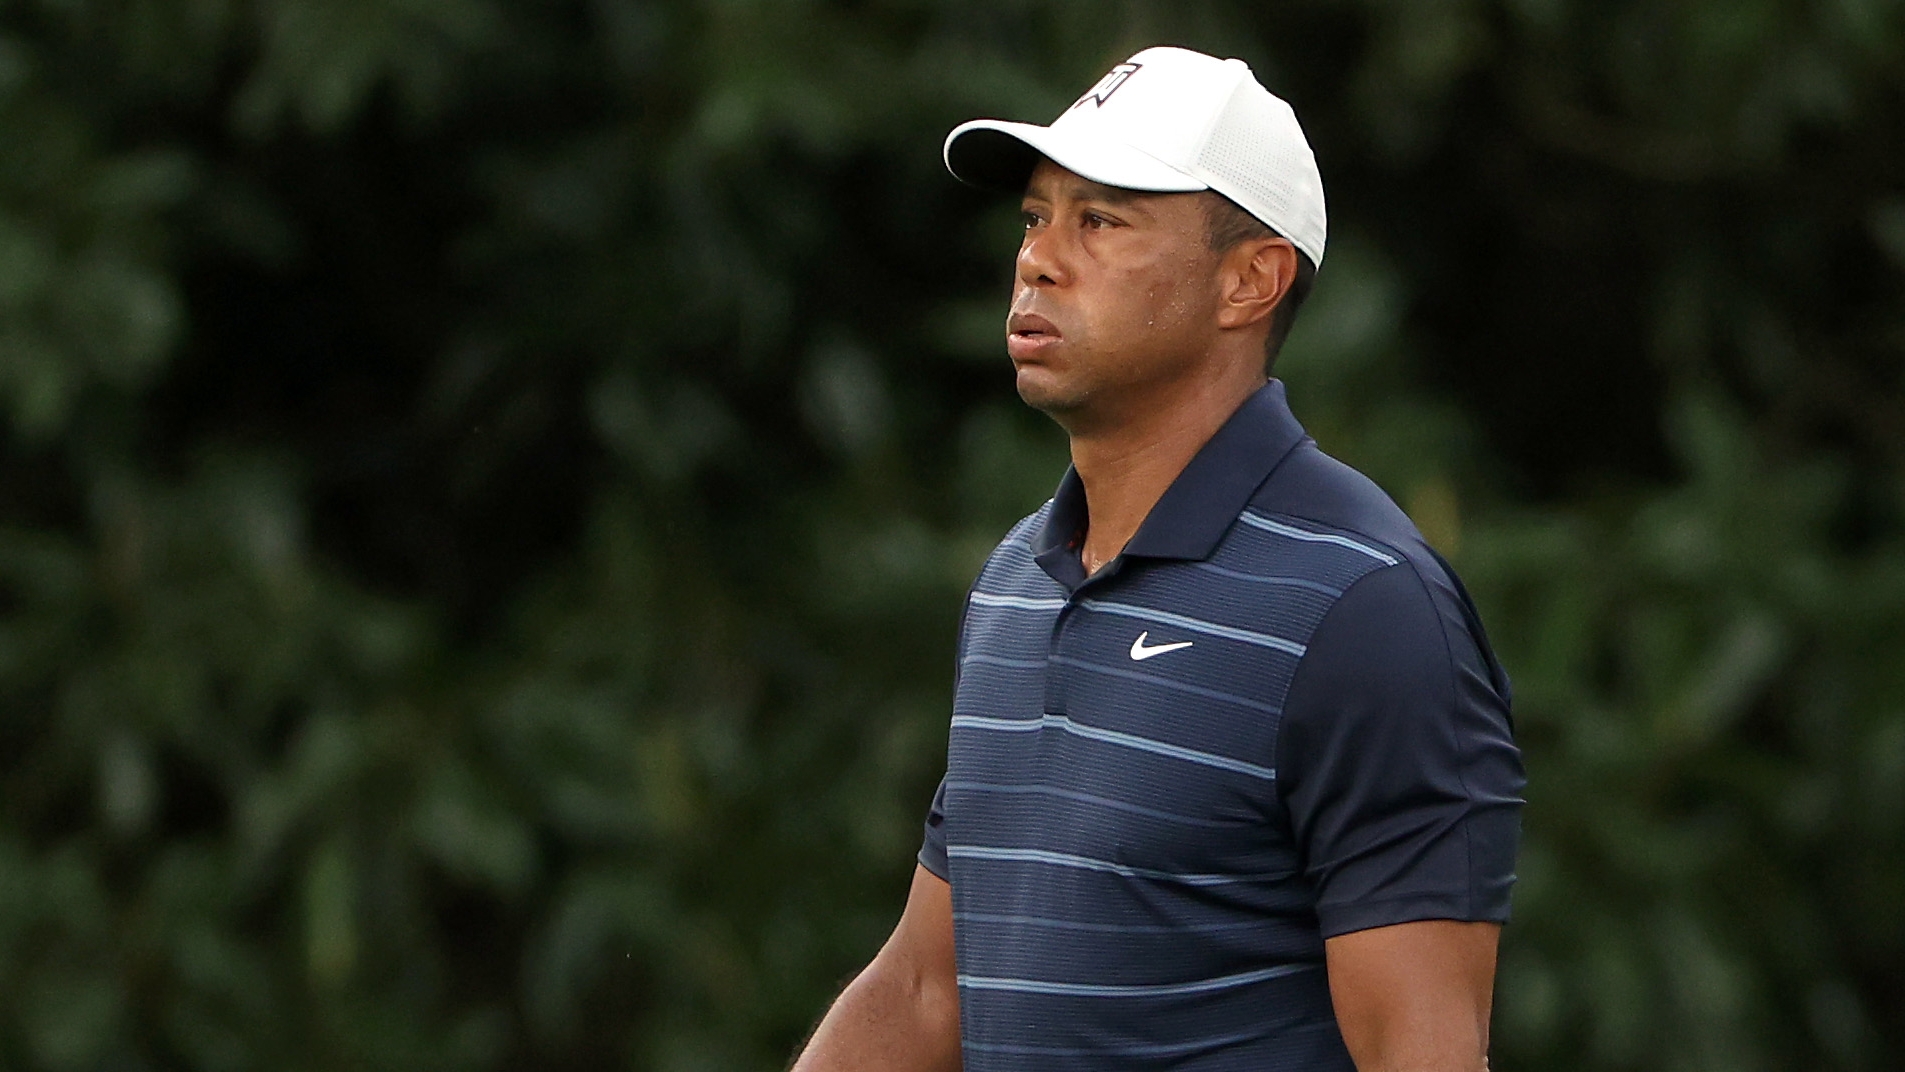 Tiger settles for par after near ace - Stream the Video